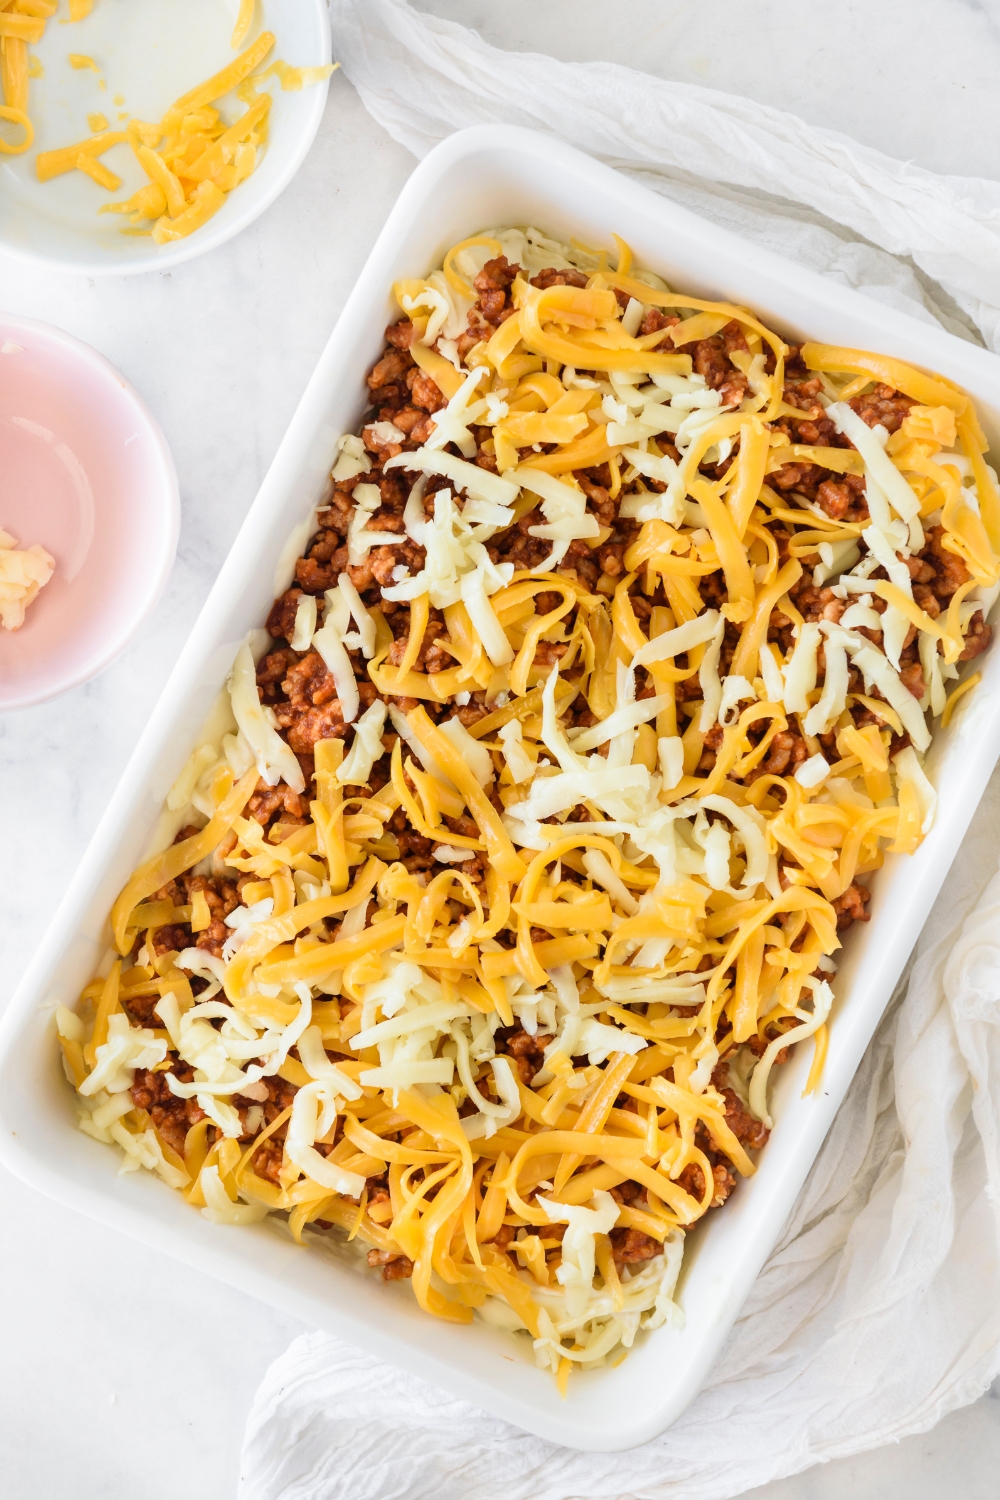 A baking dish filled with cooked spaghetti, seasoned ground meat, and shredded cheese.